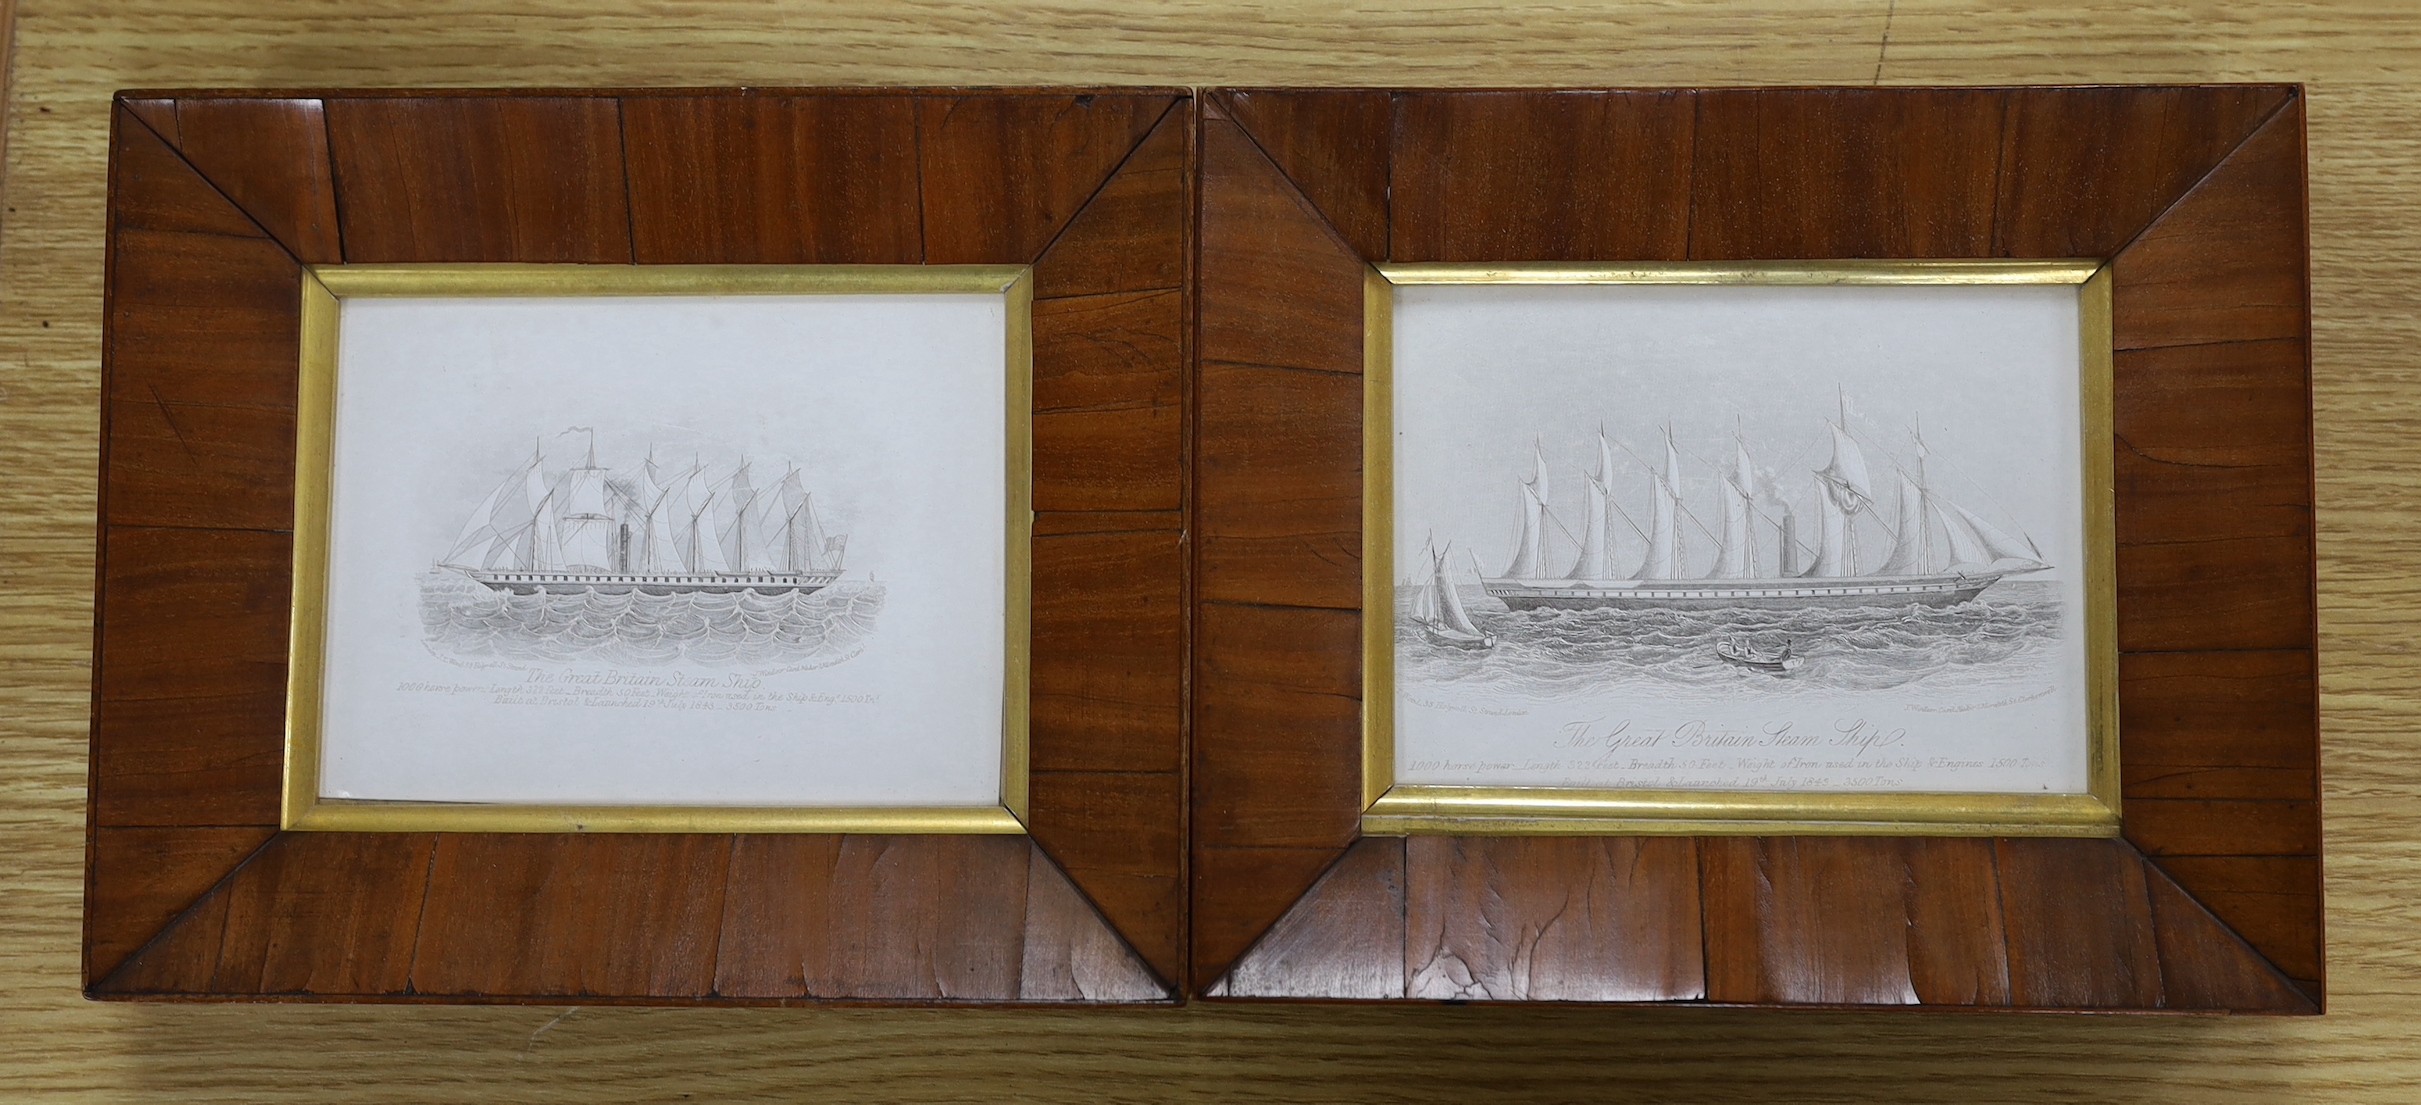 A pair of Victorian mahogany framed steel engravings on steam ships, overall 19 x 23cm